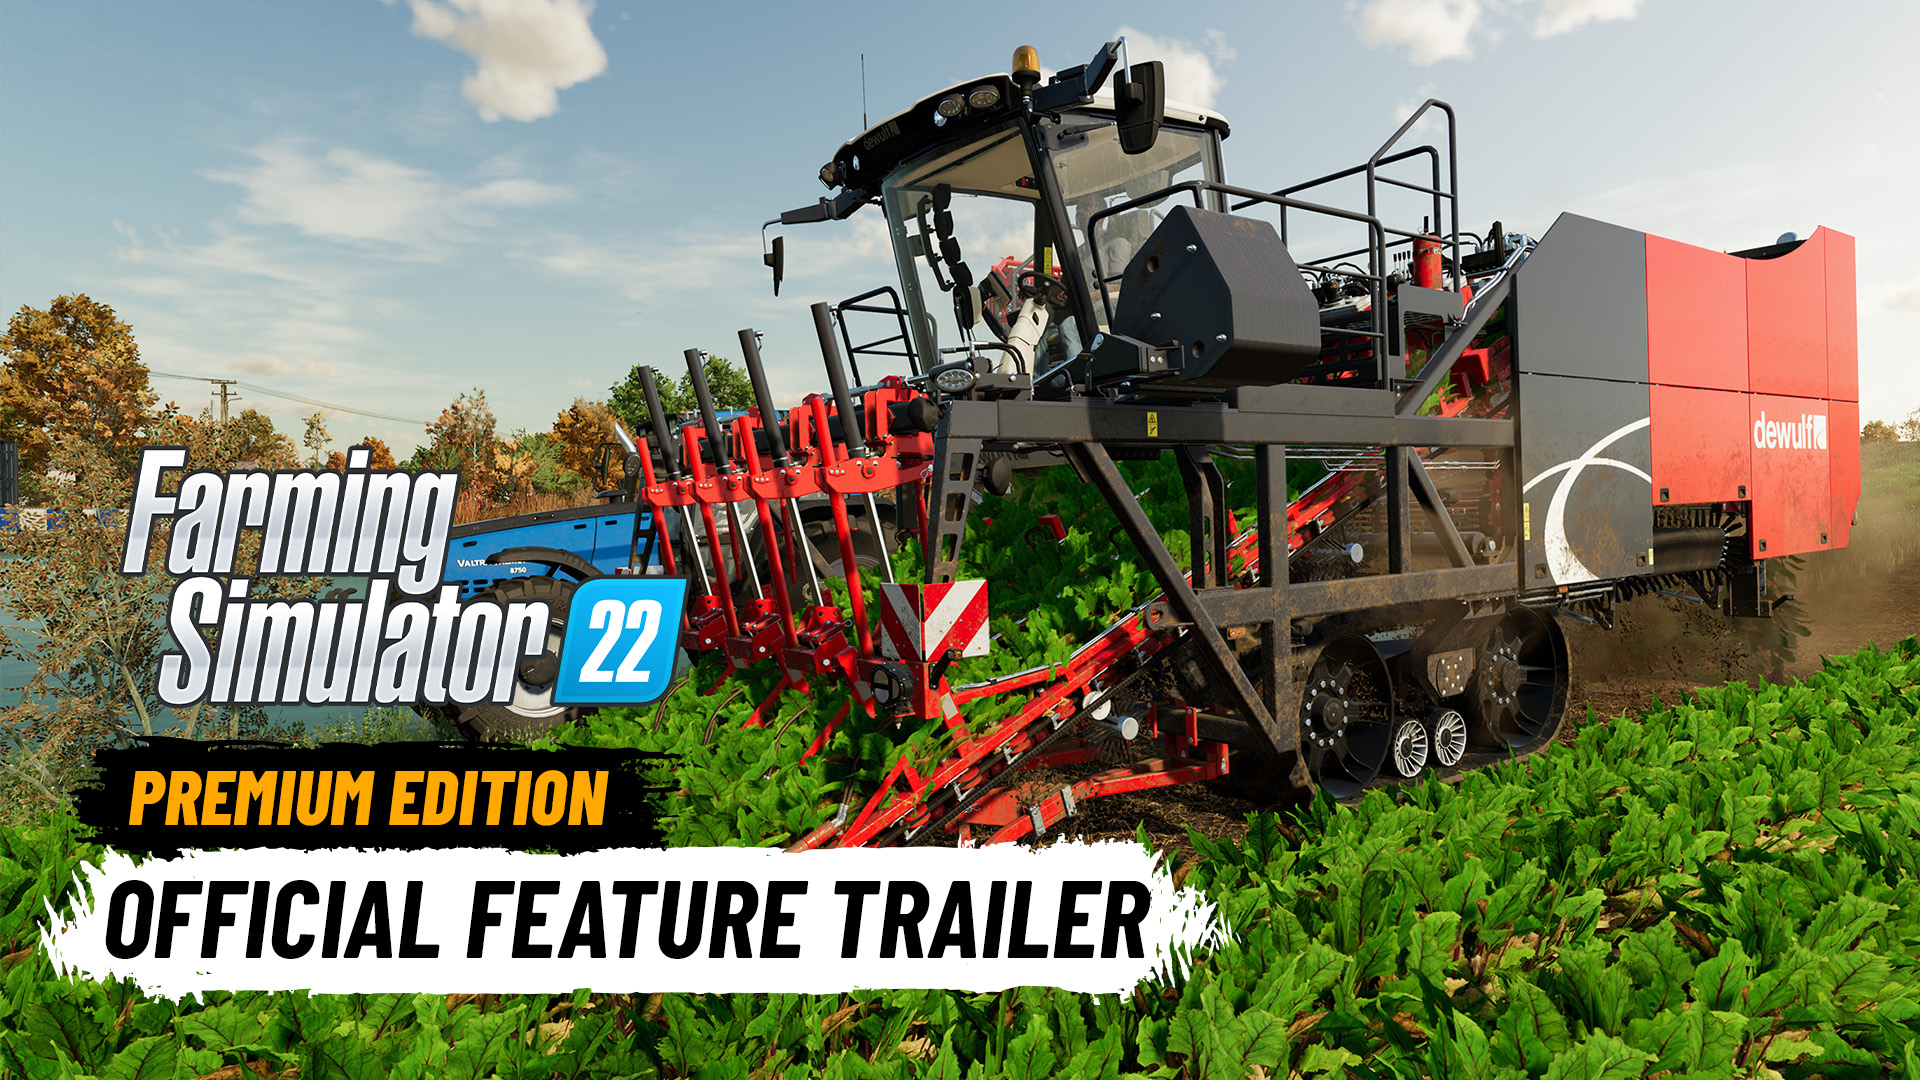 FARMING SIMULATOR @ GAMESCOM: GIANTS SOFTWARE ARRIVES WITH TRACTOR & PREMIUM EDITION